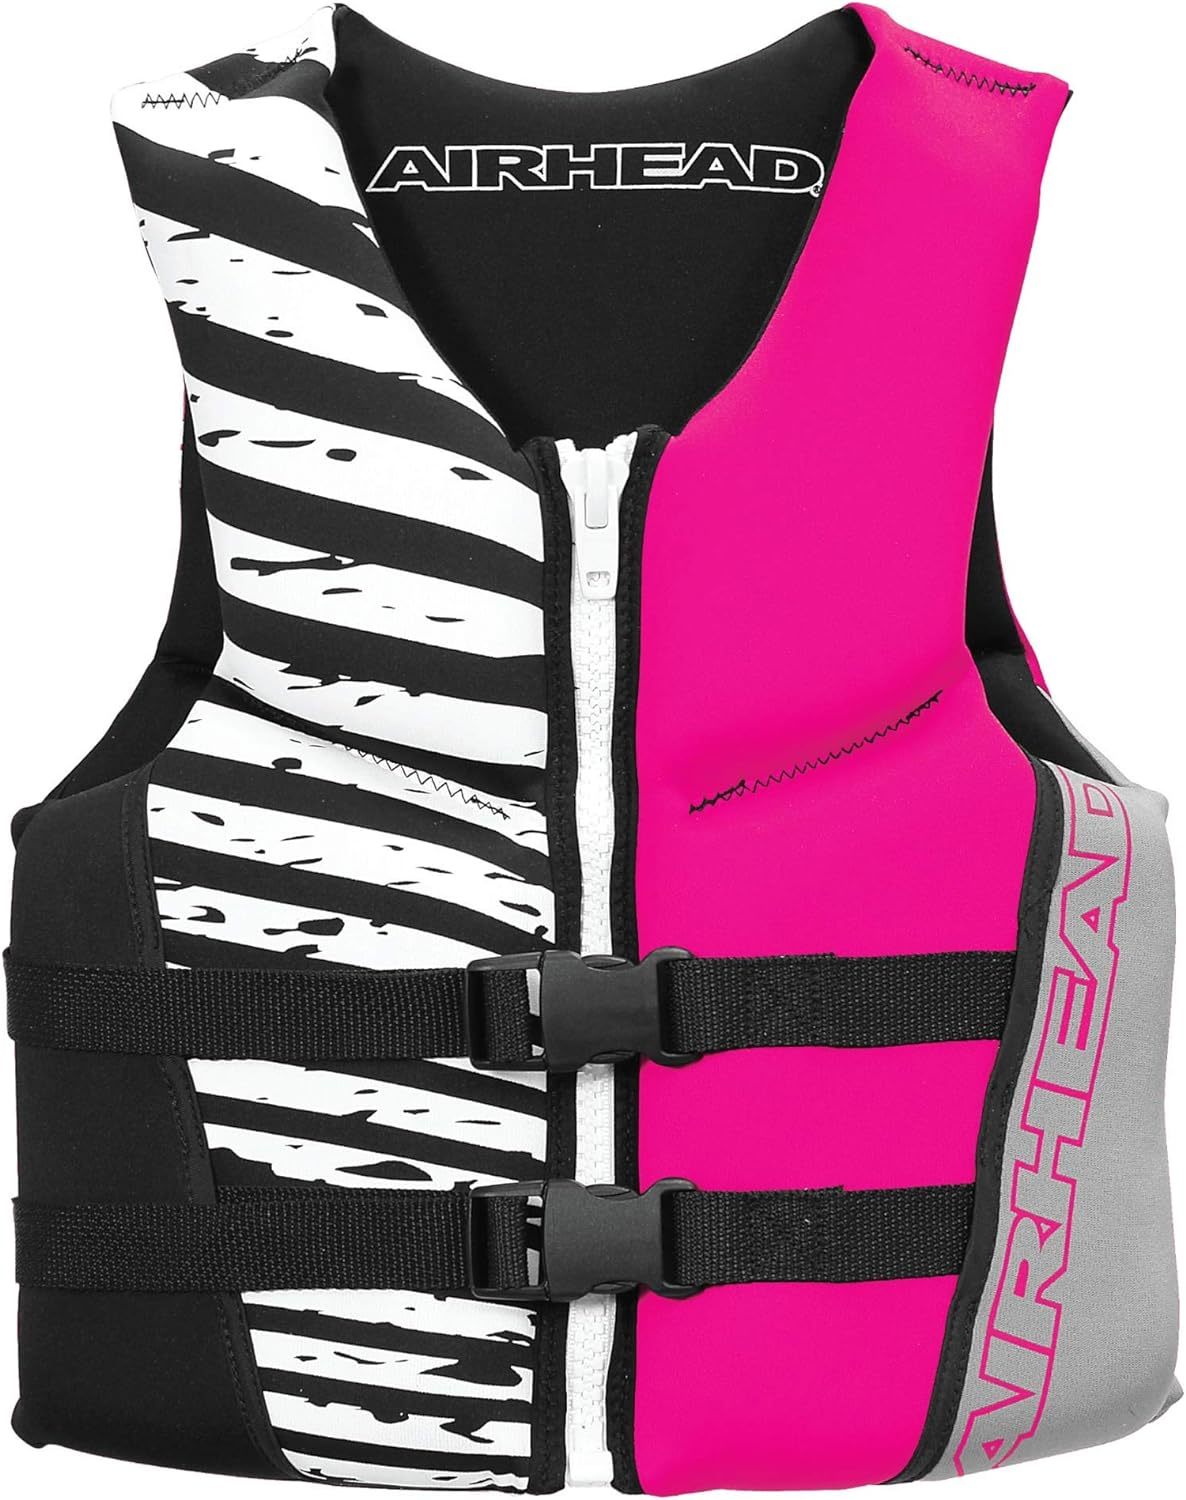 Youth And Women'S Sizes Of The Airhead Wicked Kwik-Dry Neolite Flex Life Jacket - $62.99